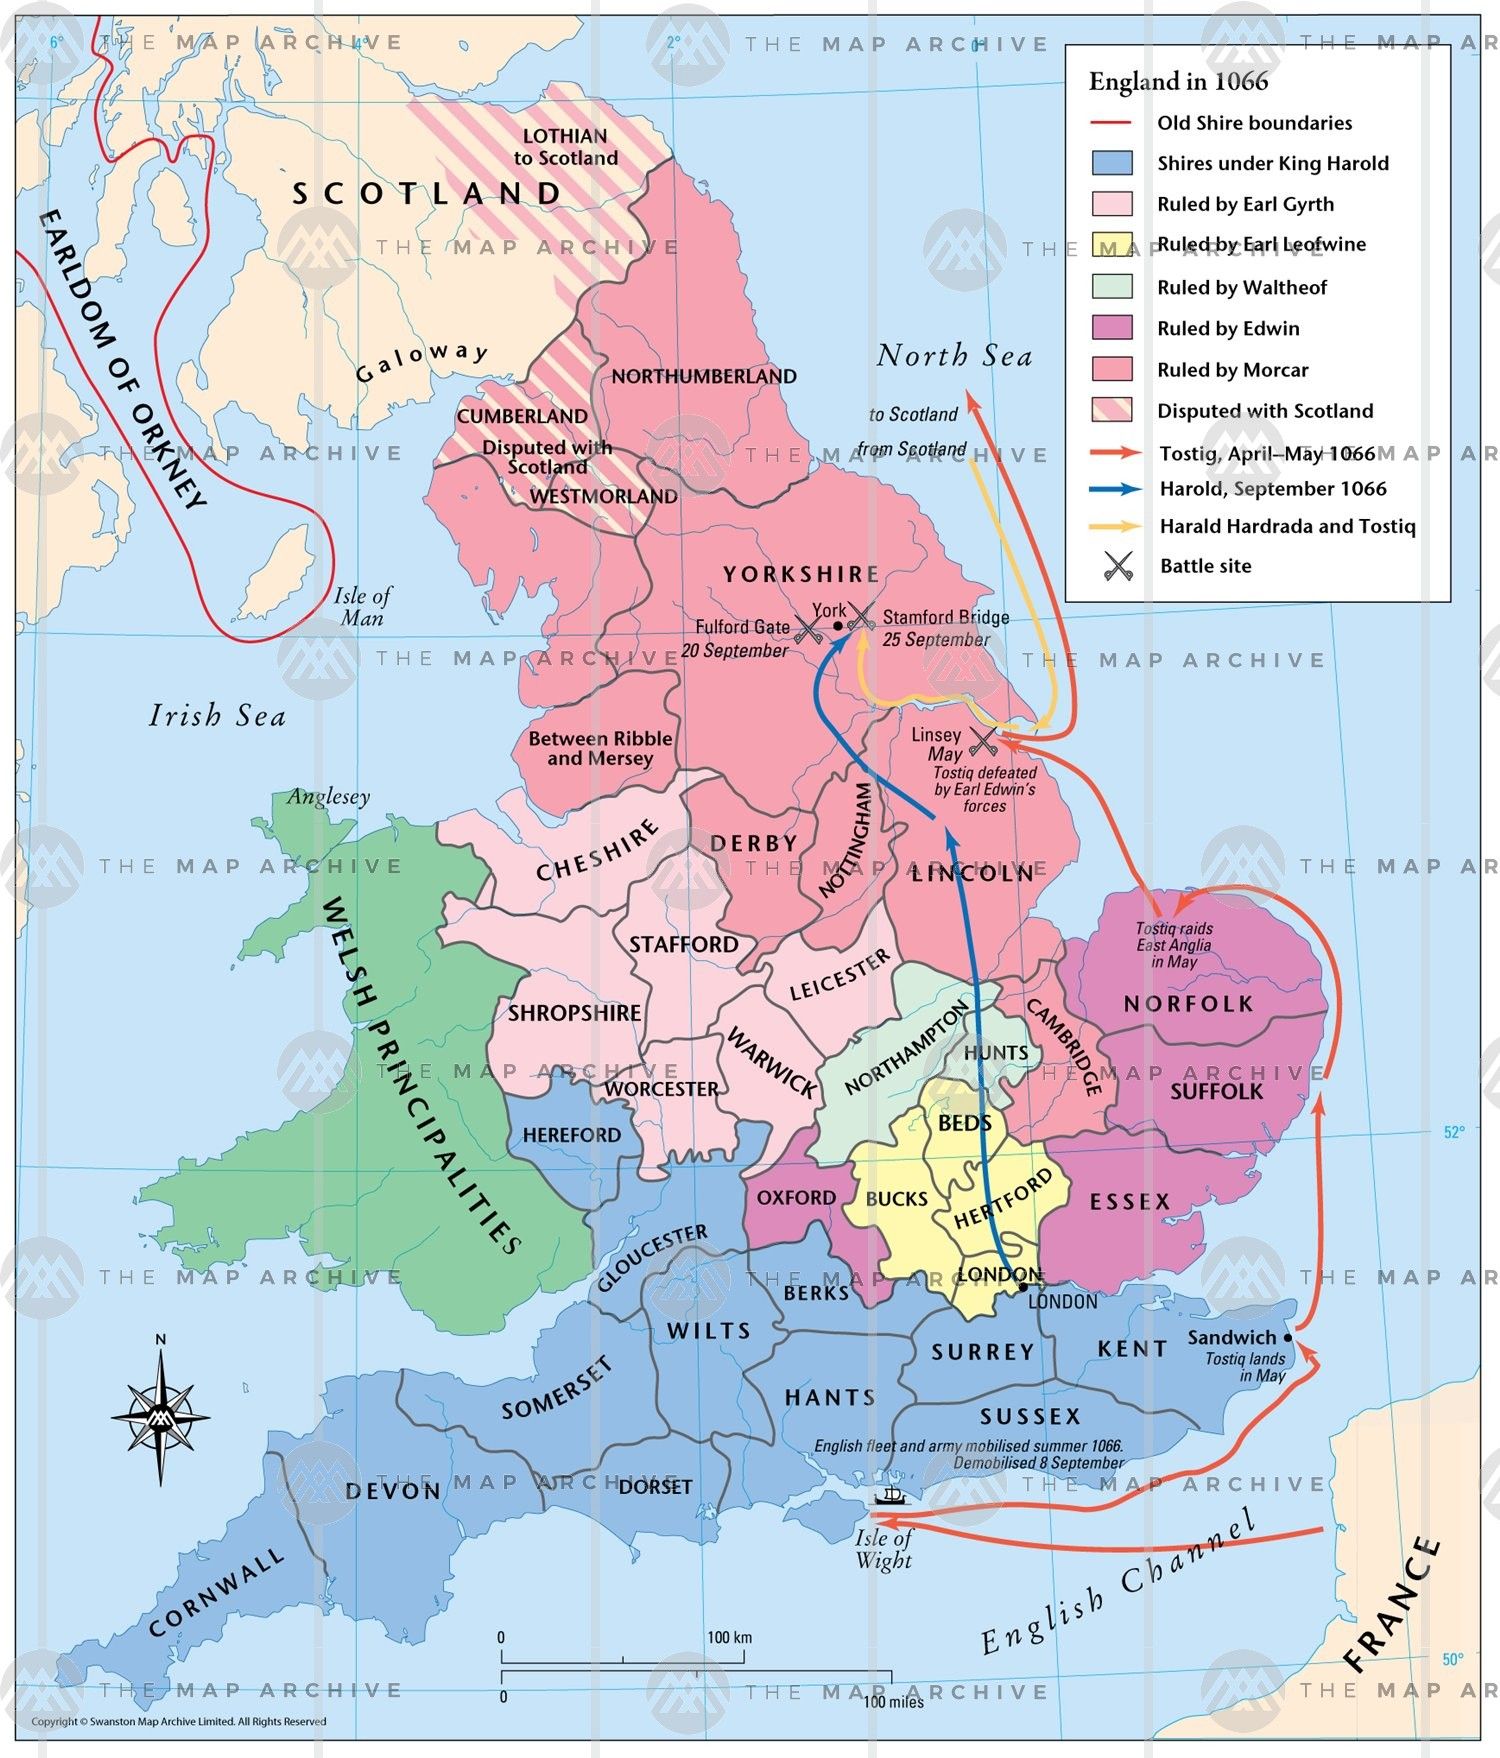 England, Map of the Shires in 1066